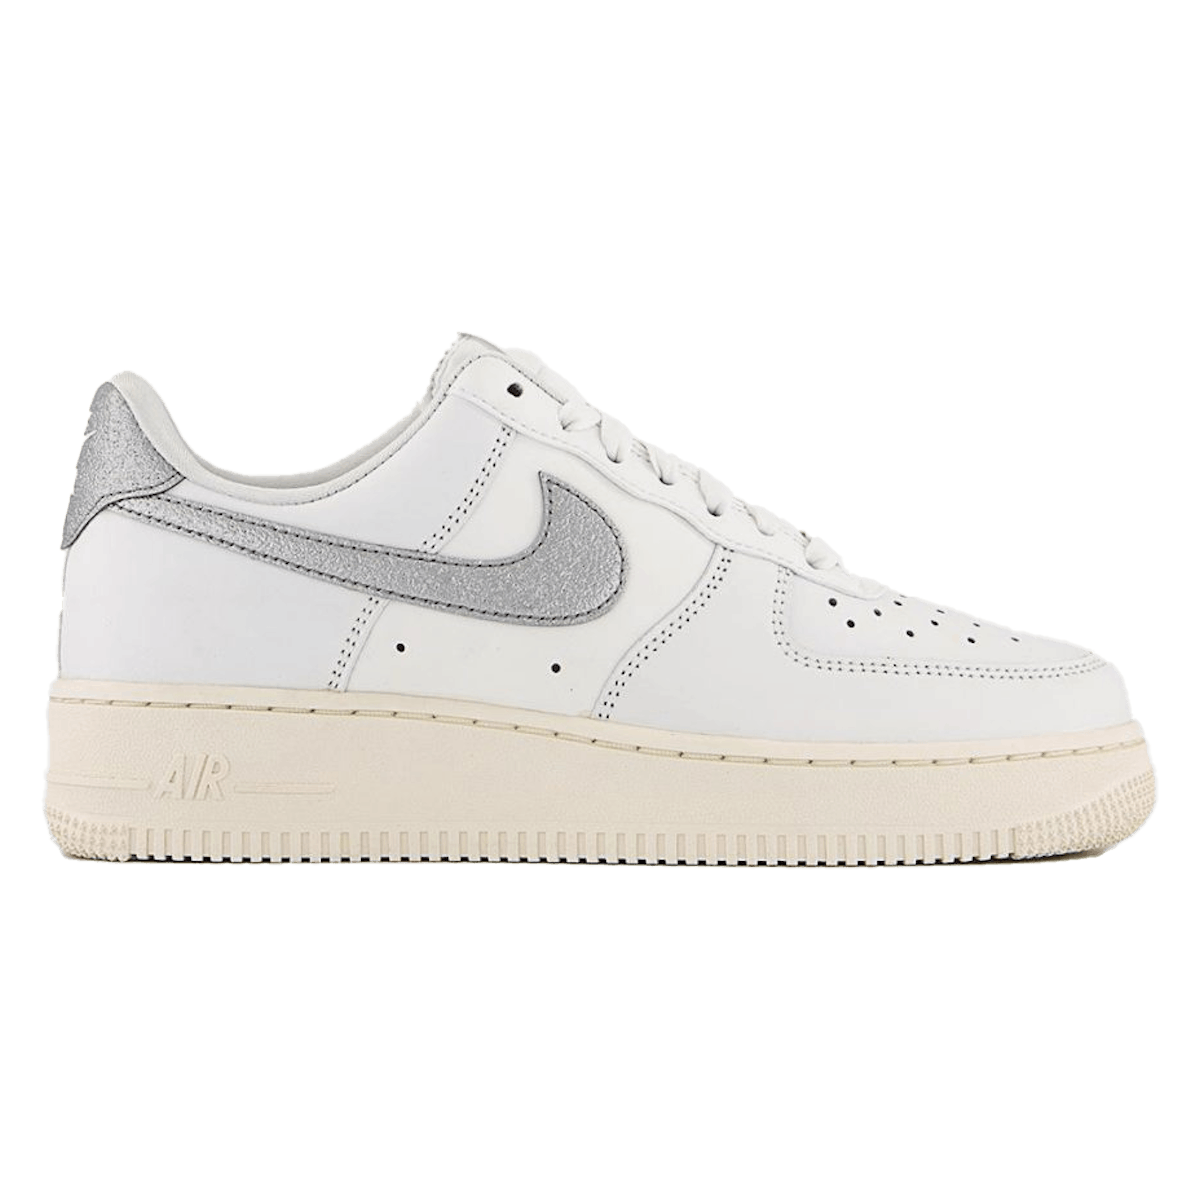 Nike Air Force 1 '07 Wmns "Silver Swoosh"